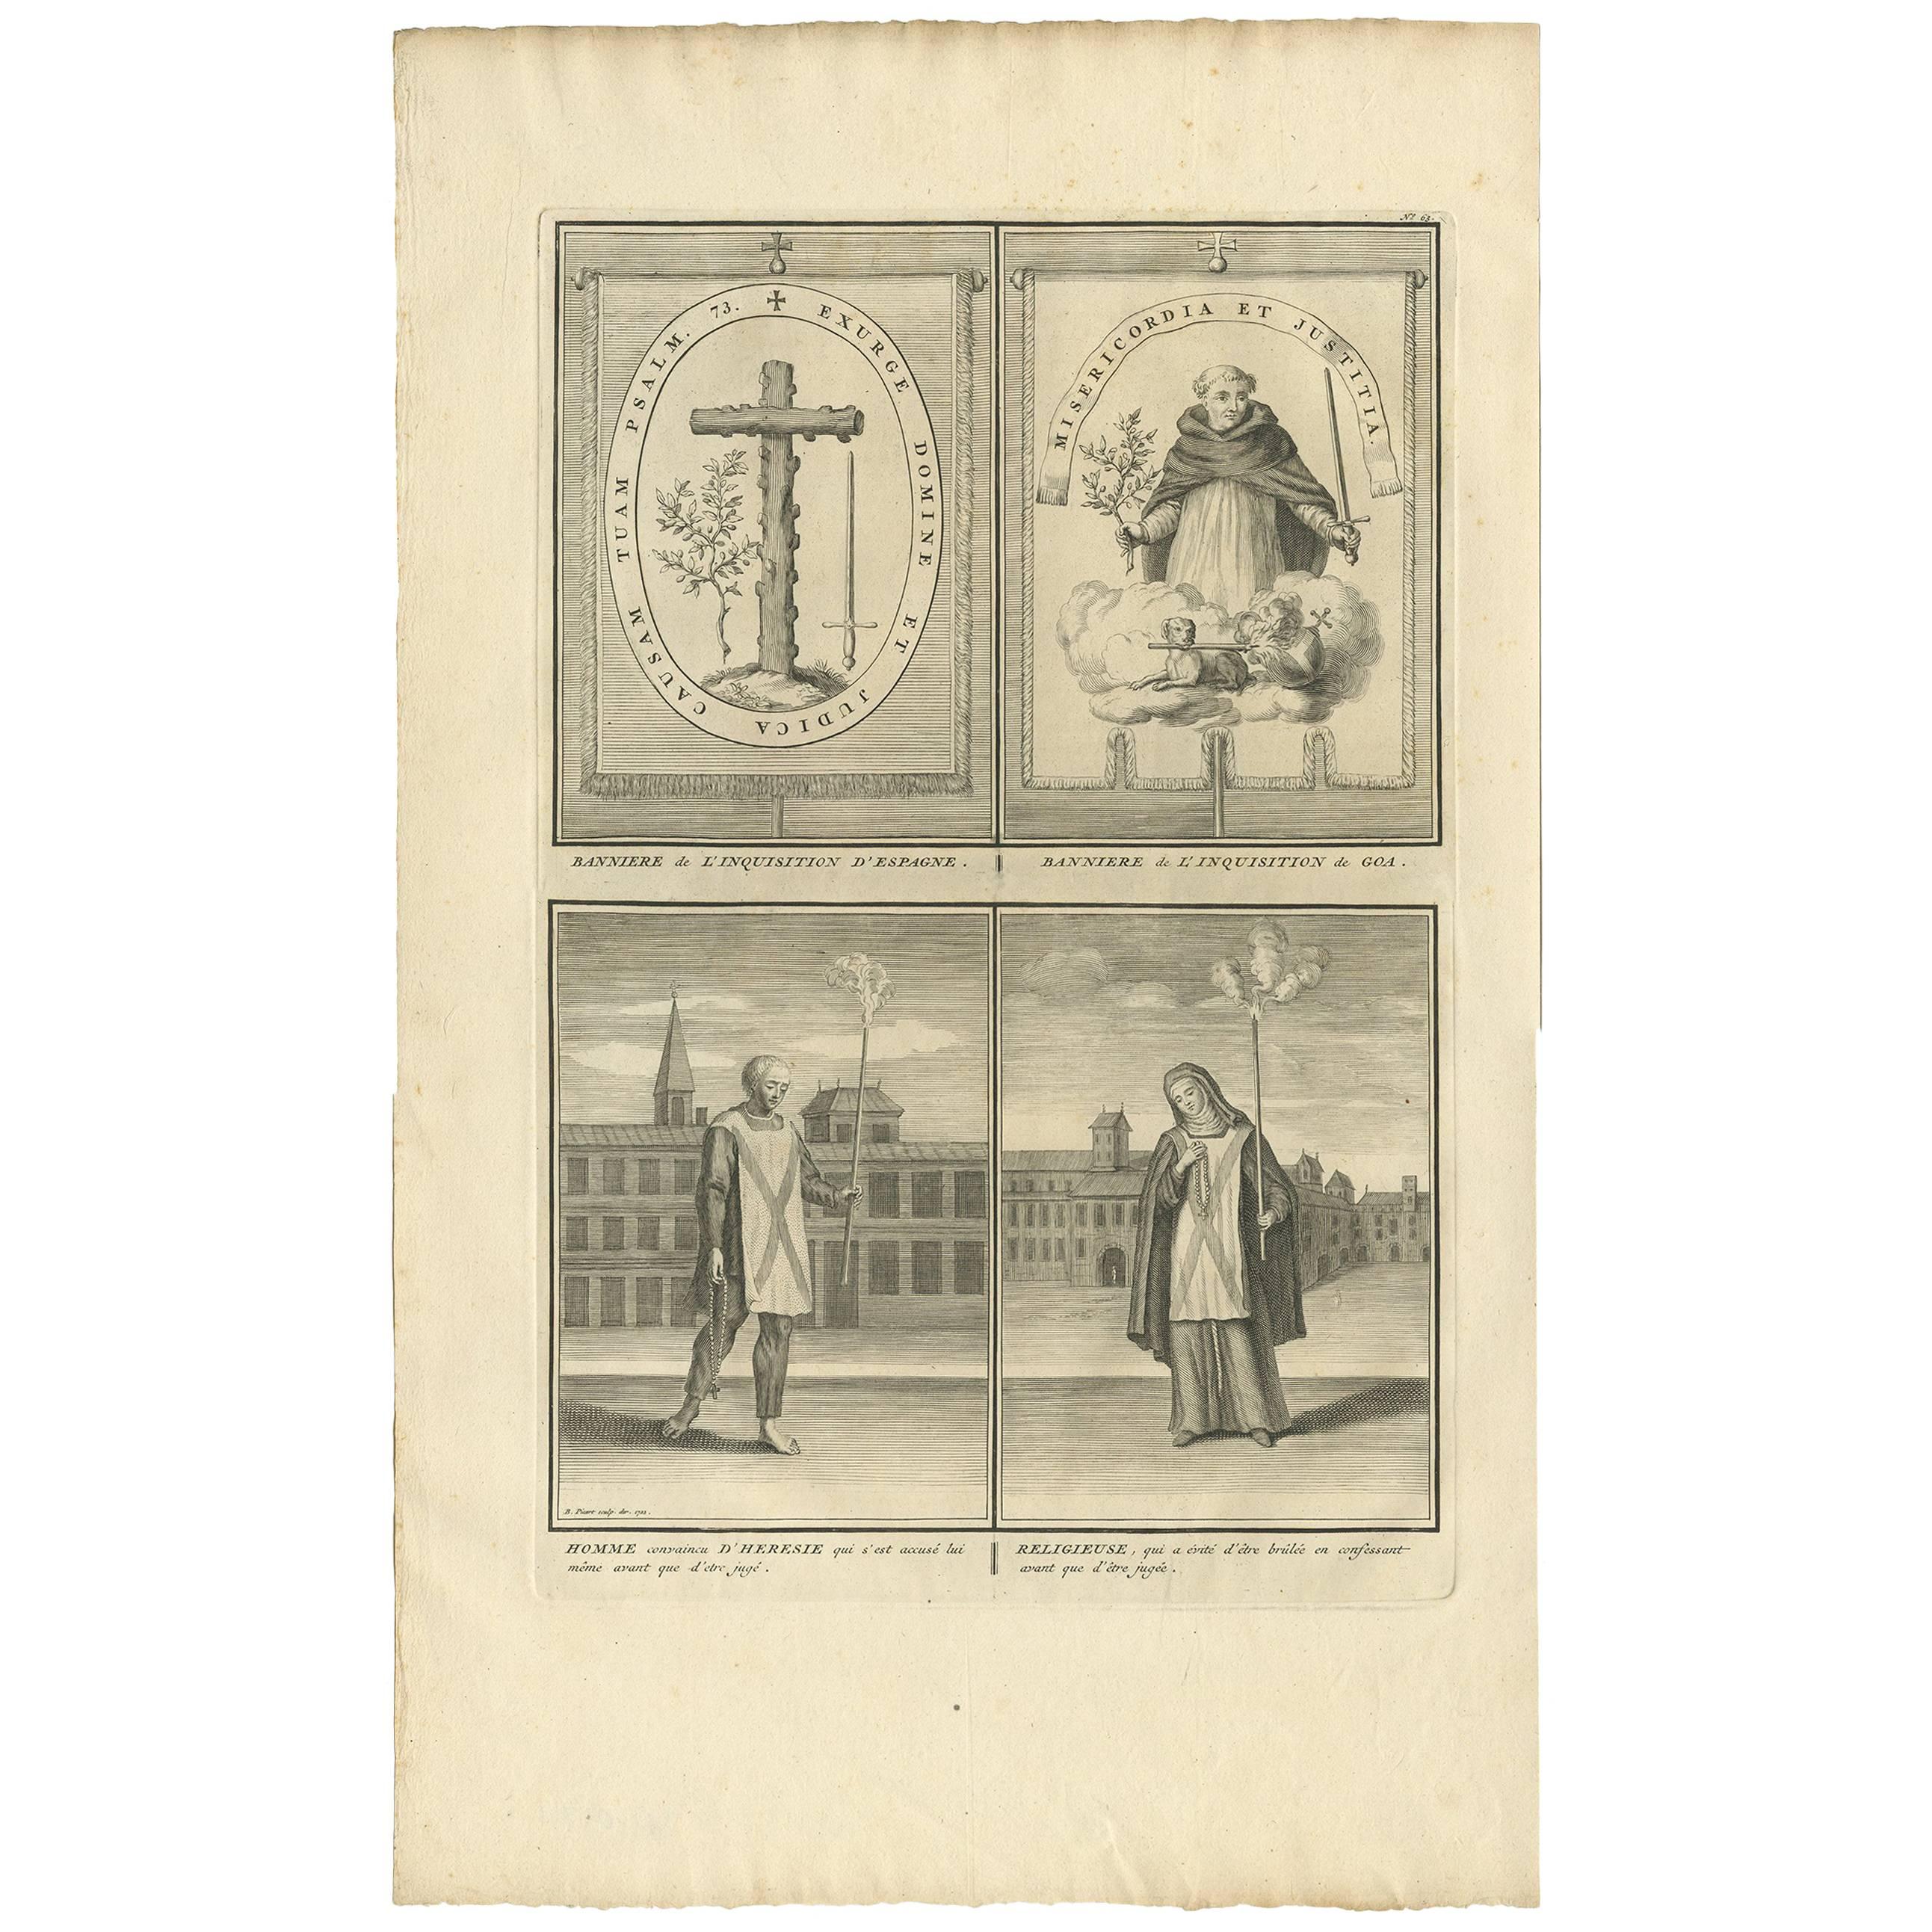 Antique Print of Inquisition Banners and Religious People by B. Picart, 1722